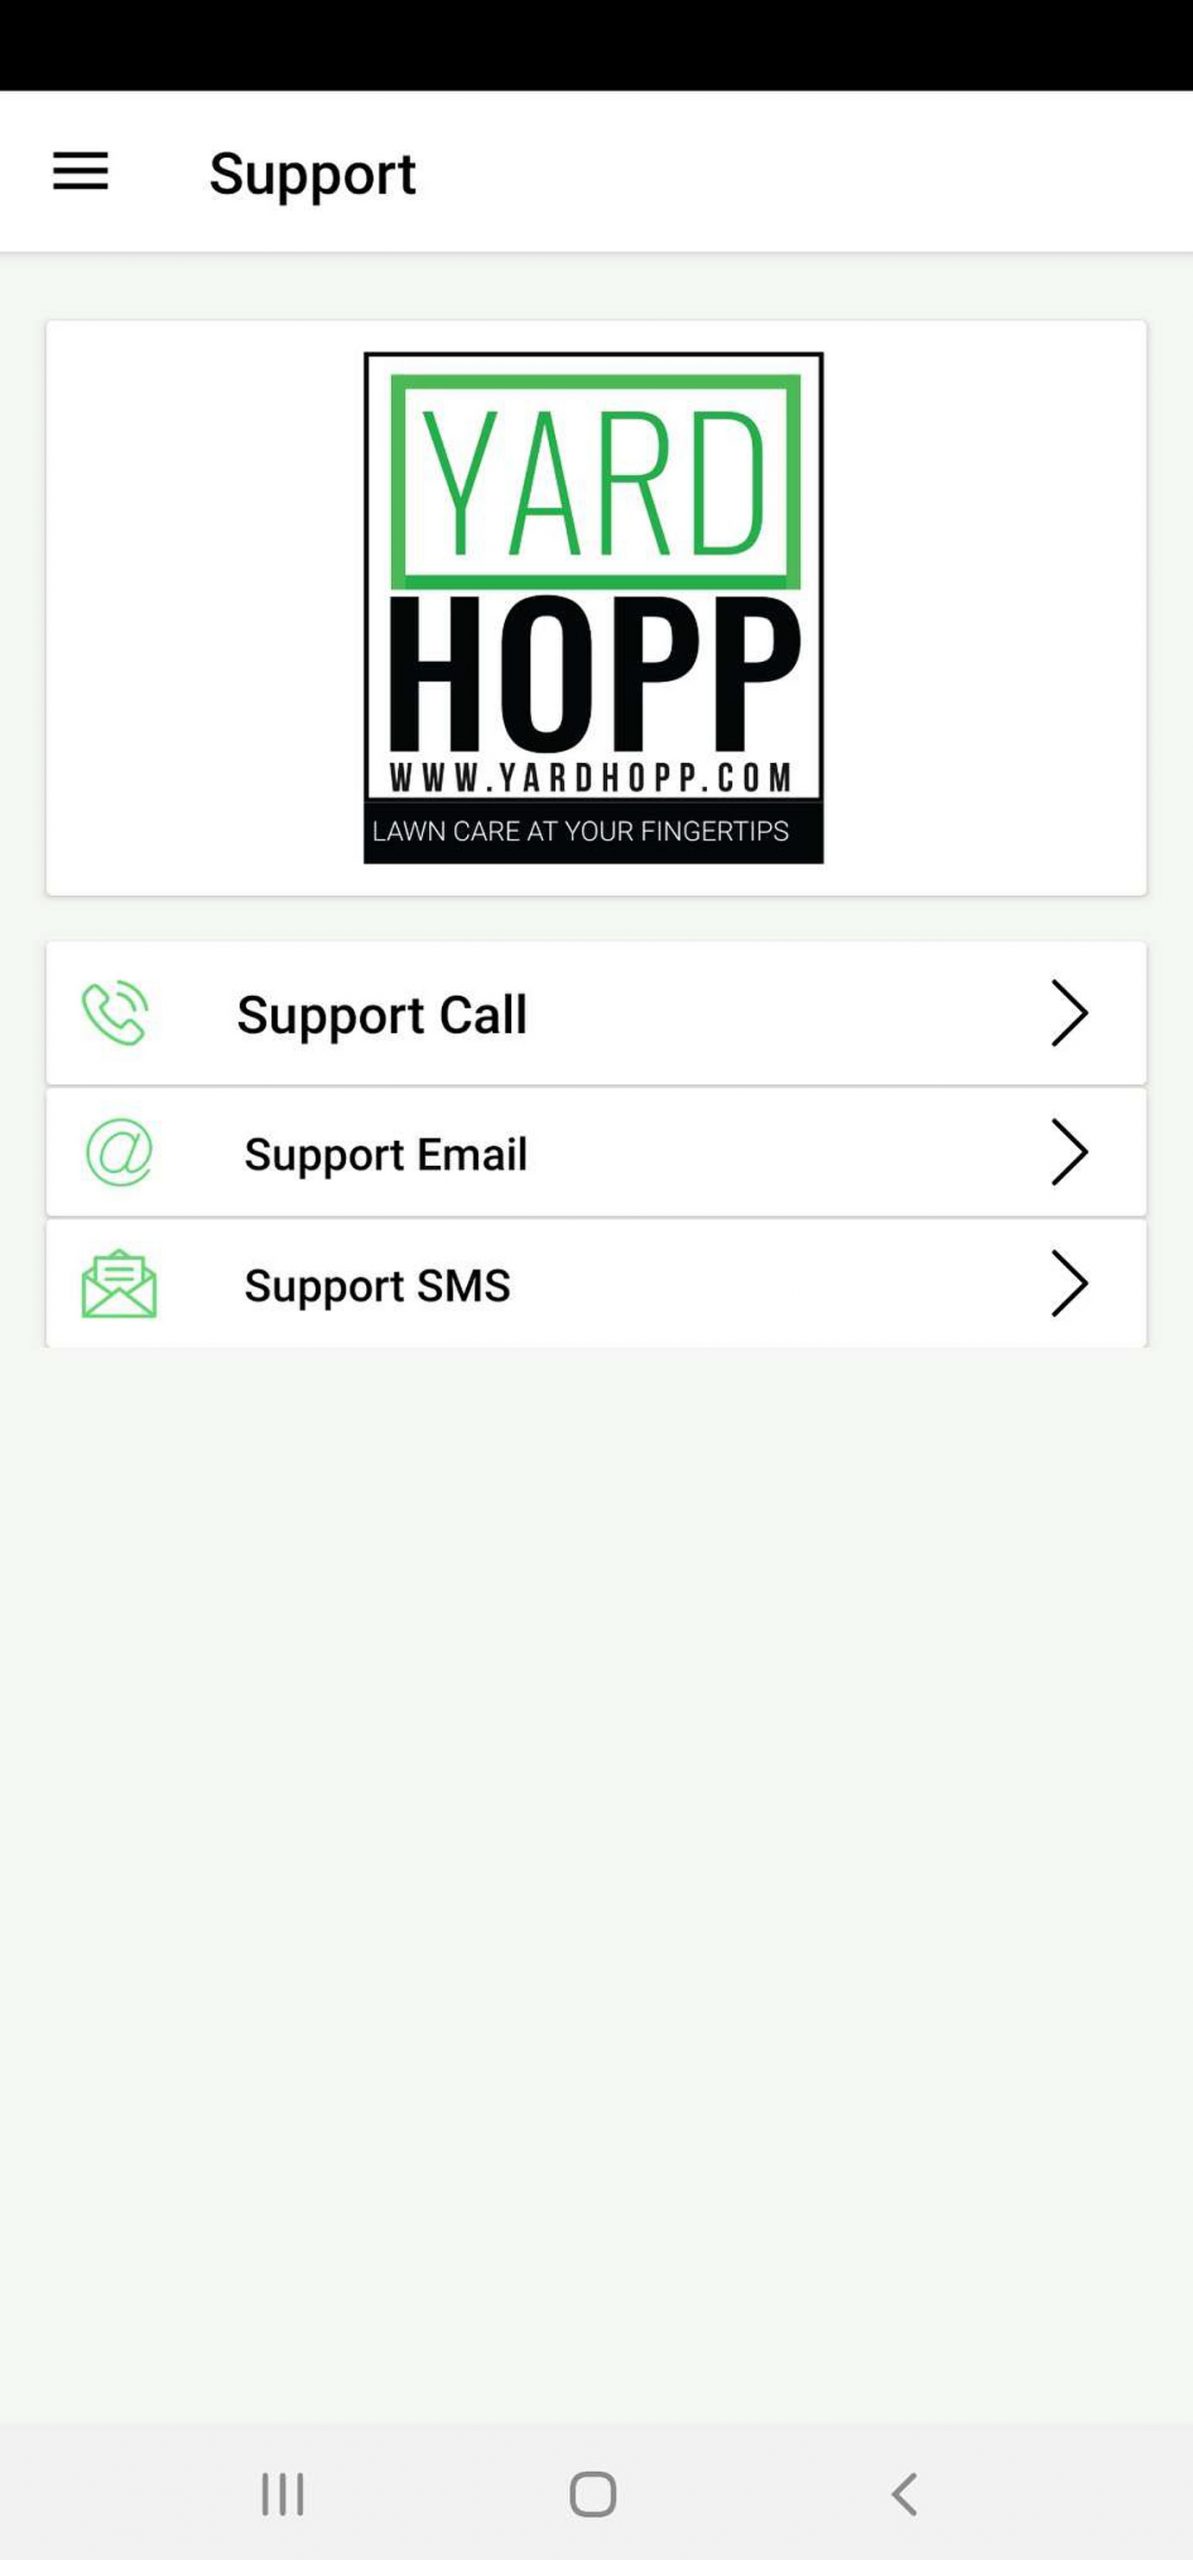 Yardhopp App support page on mobile screen